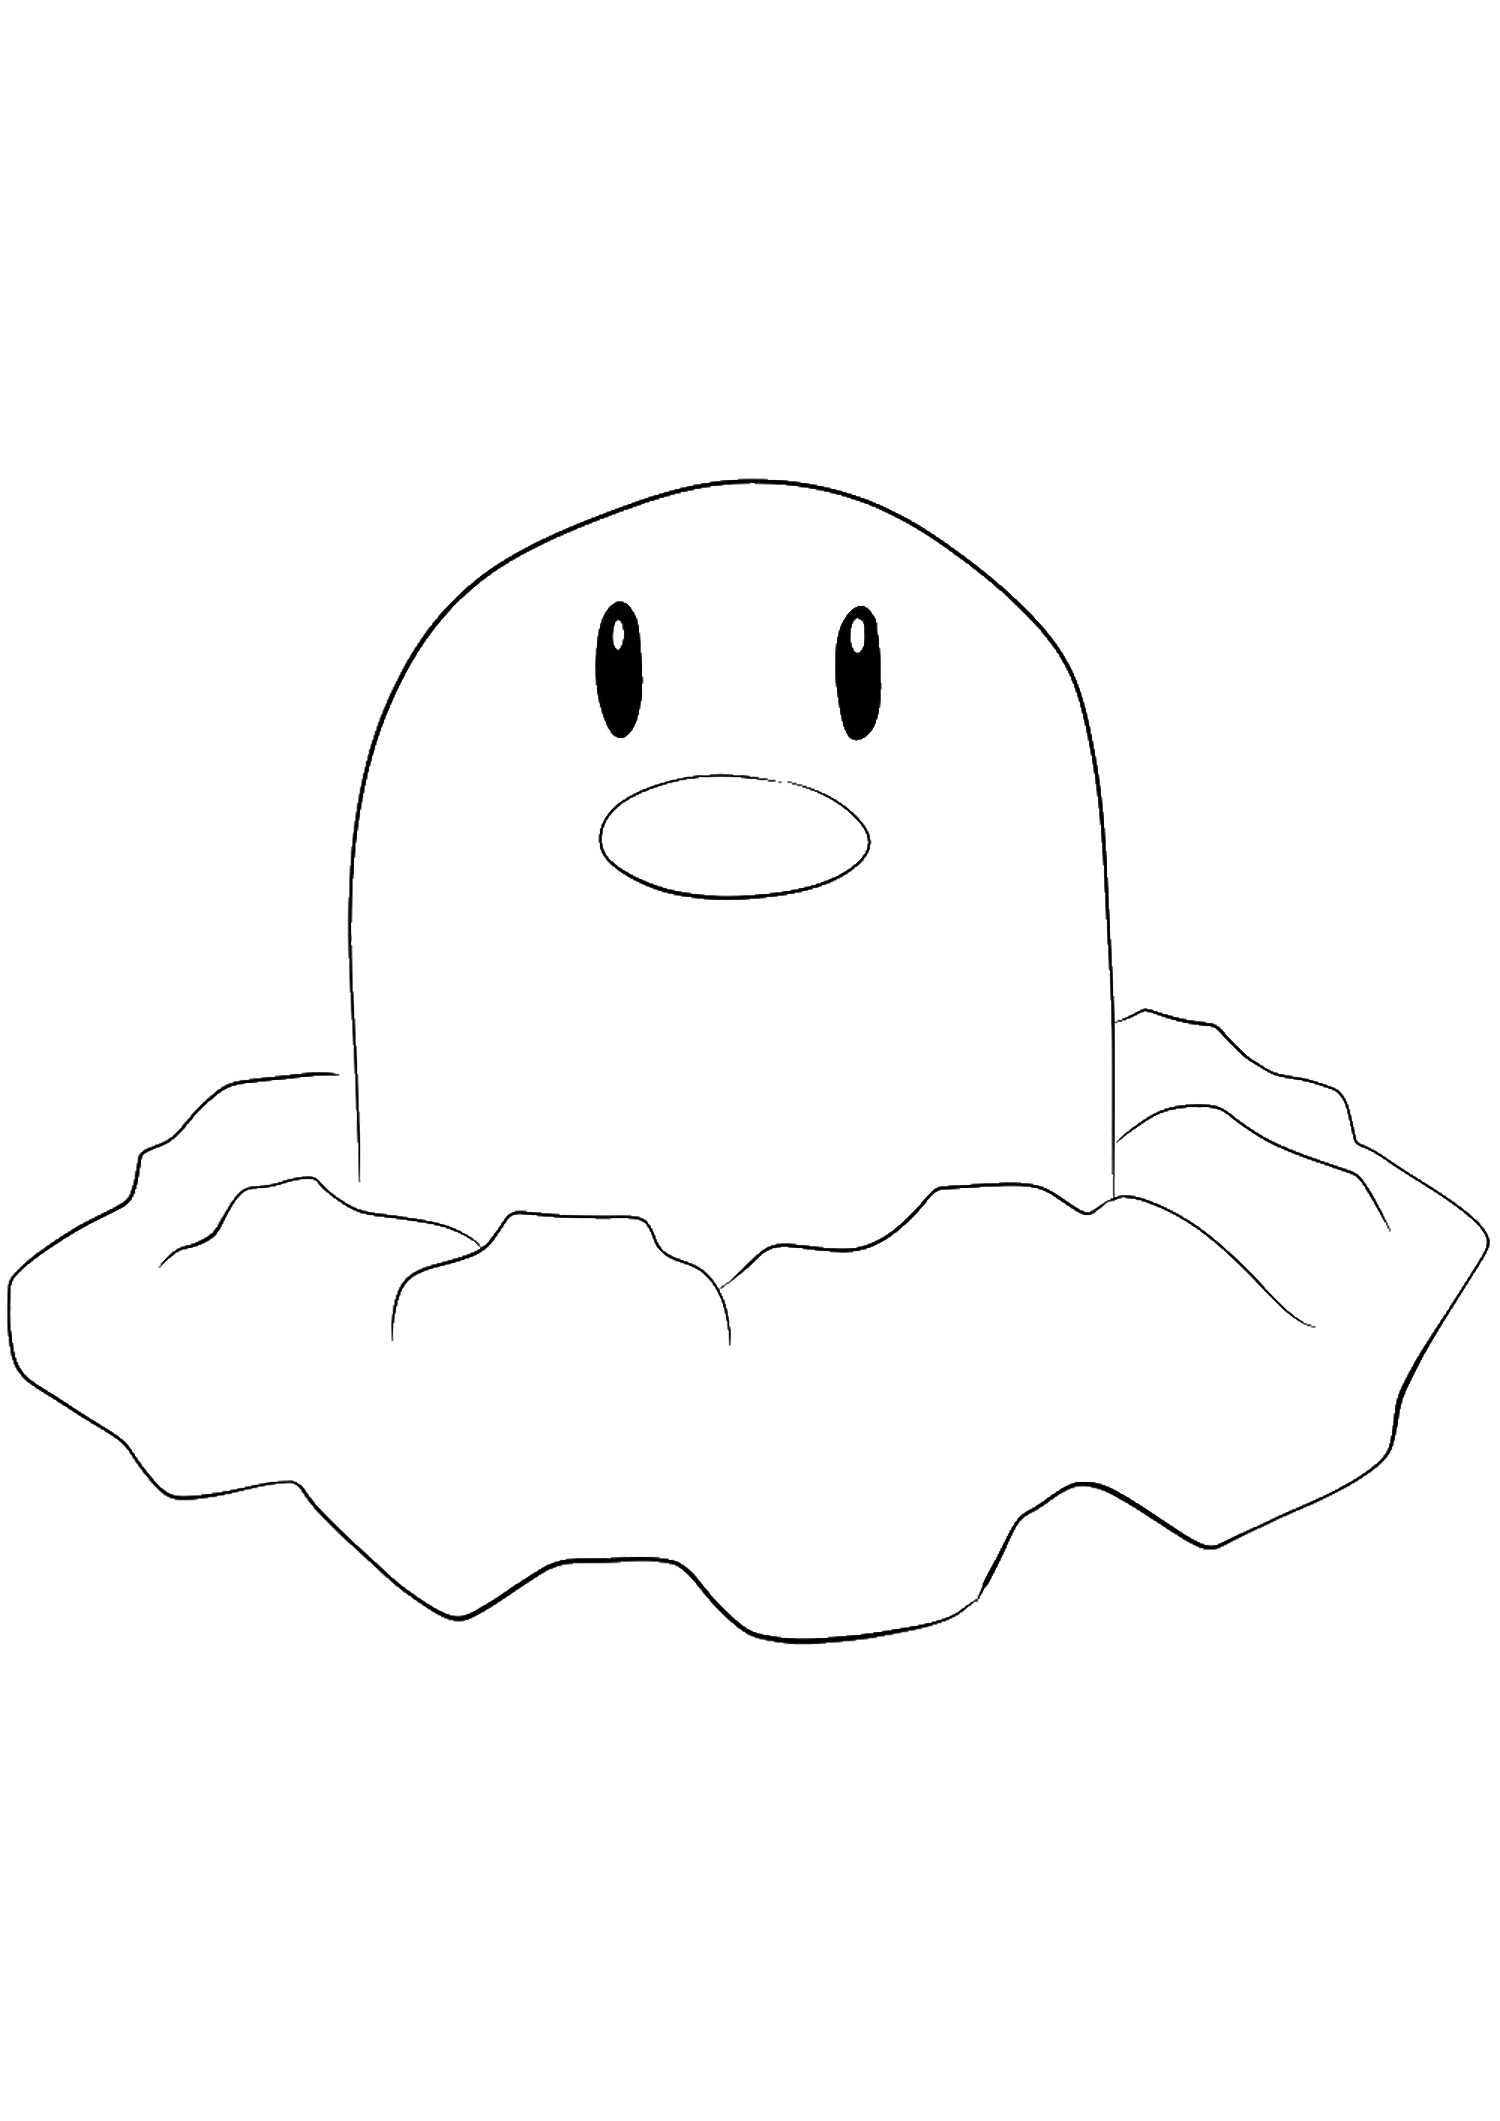 Diglett No50 Pokemon Generation I All Pokemon Coloring Pages